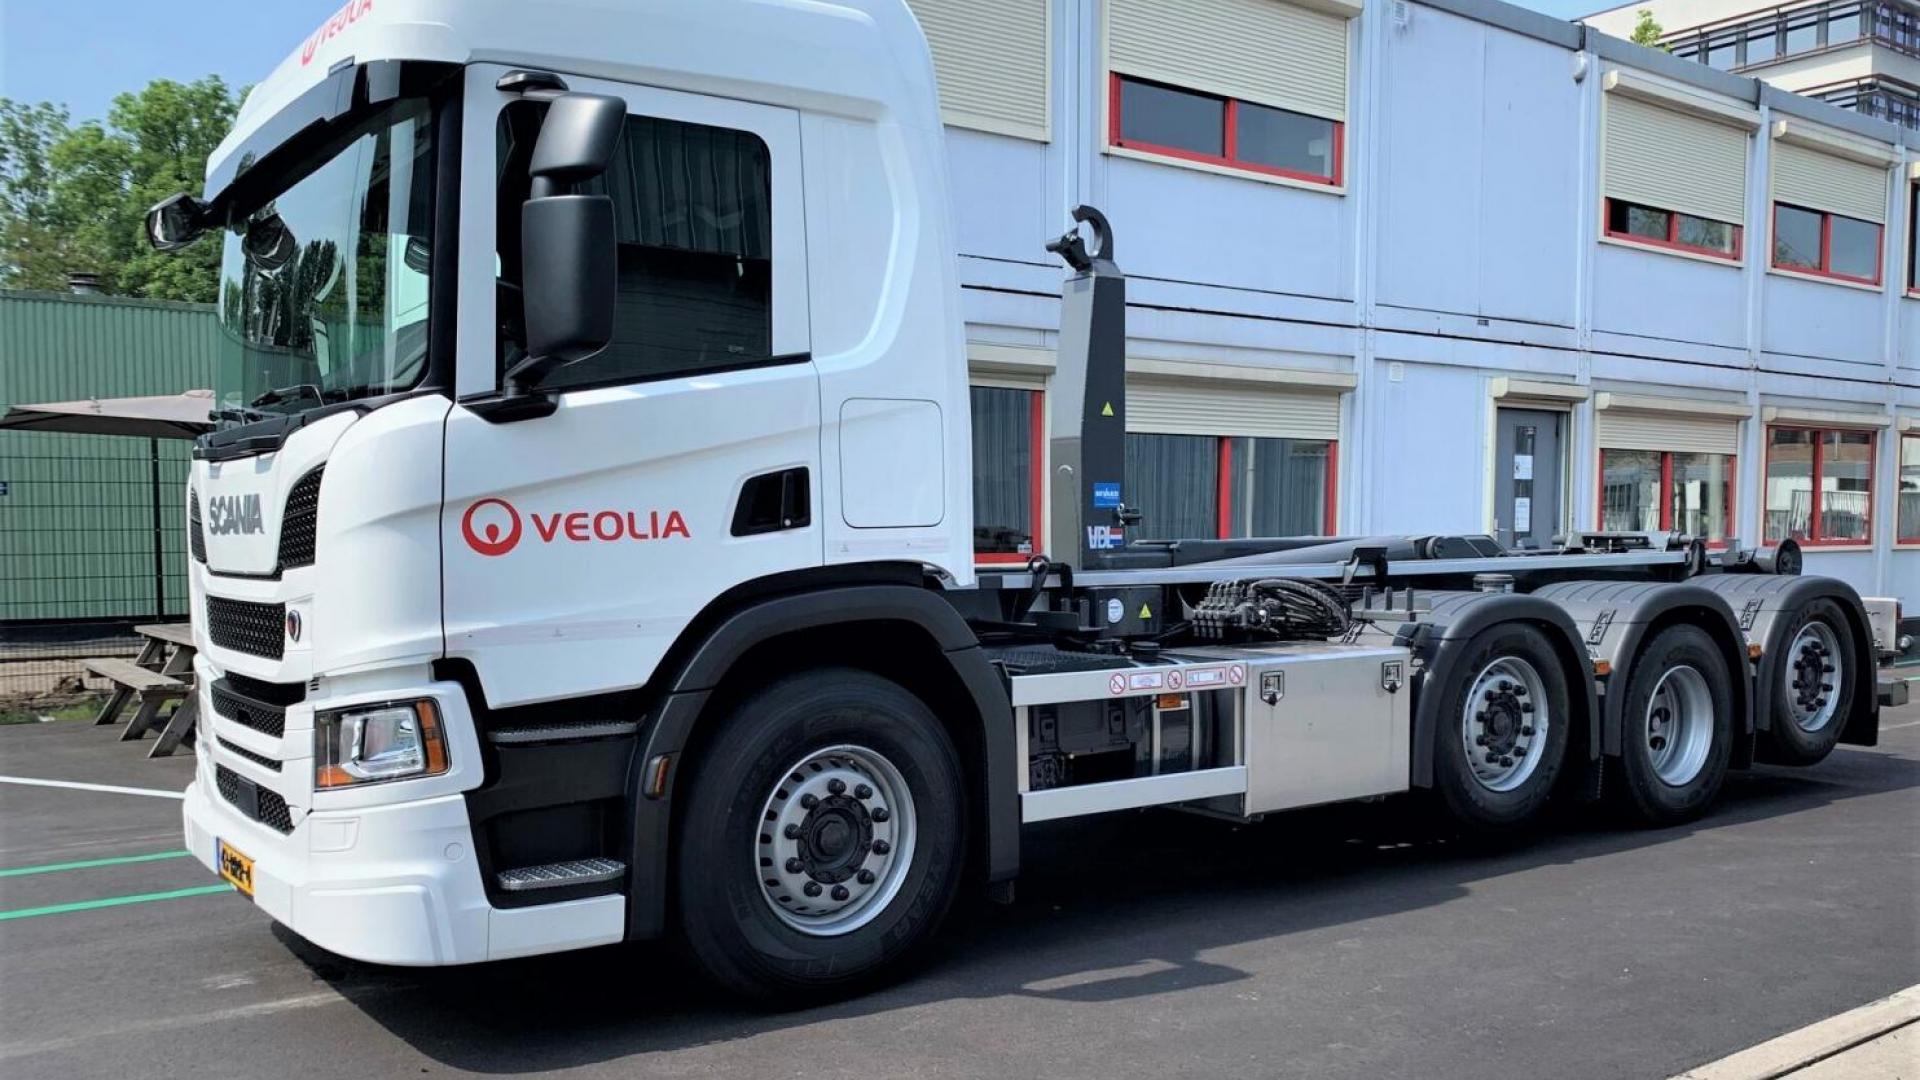 VDL hookliftsystem for Veolia Paper Recycling